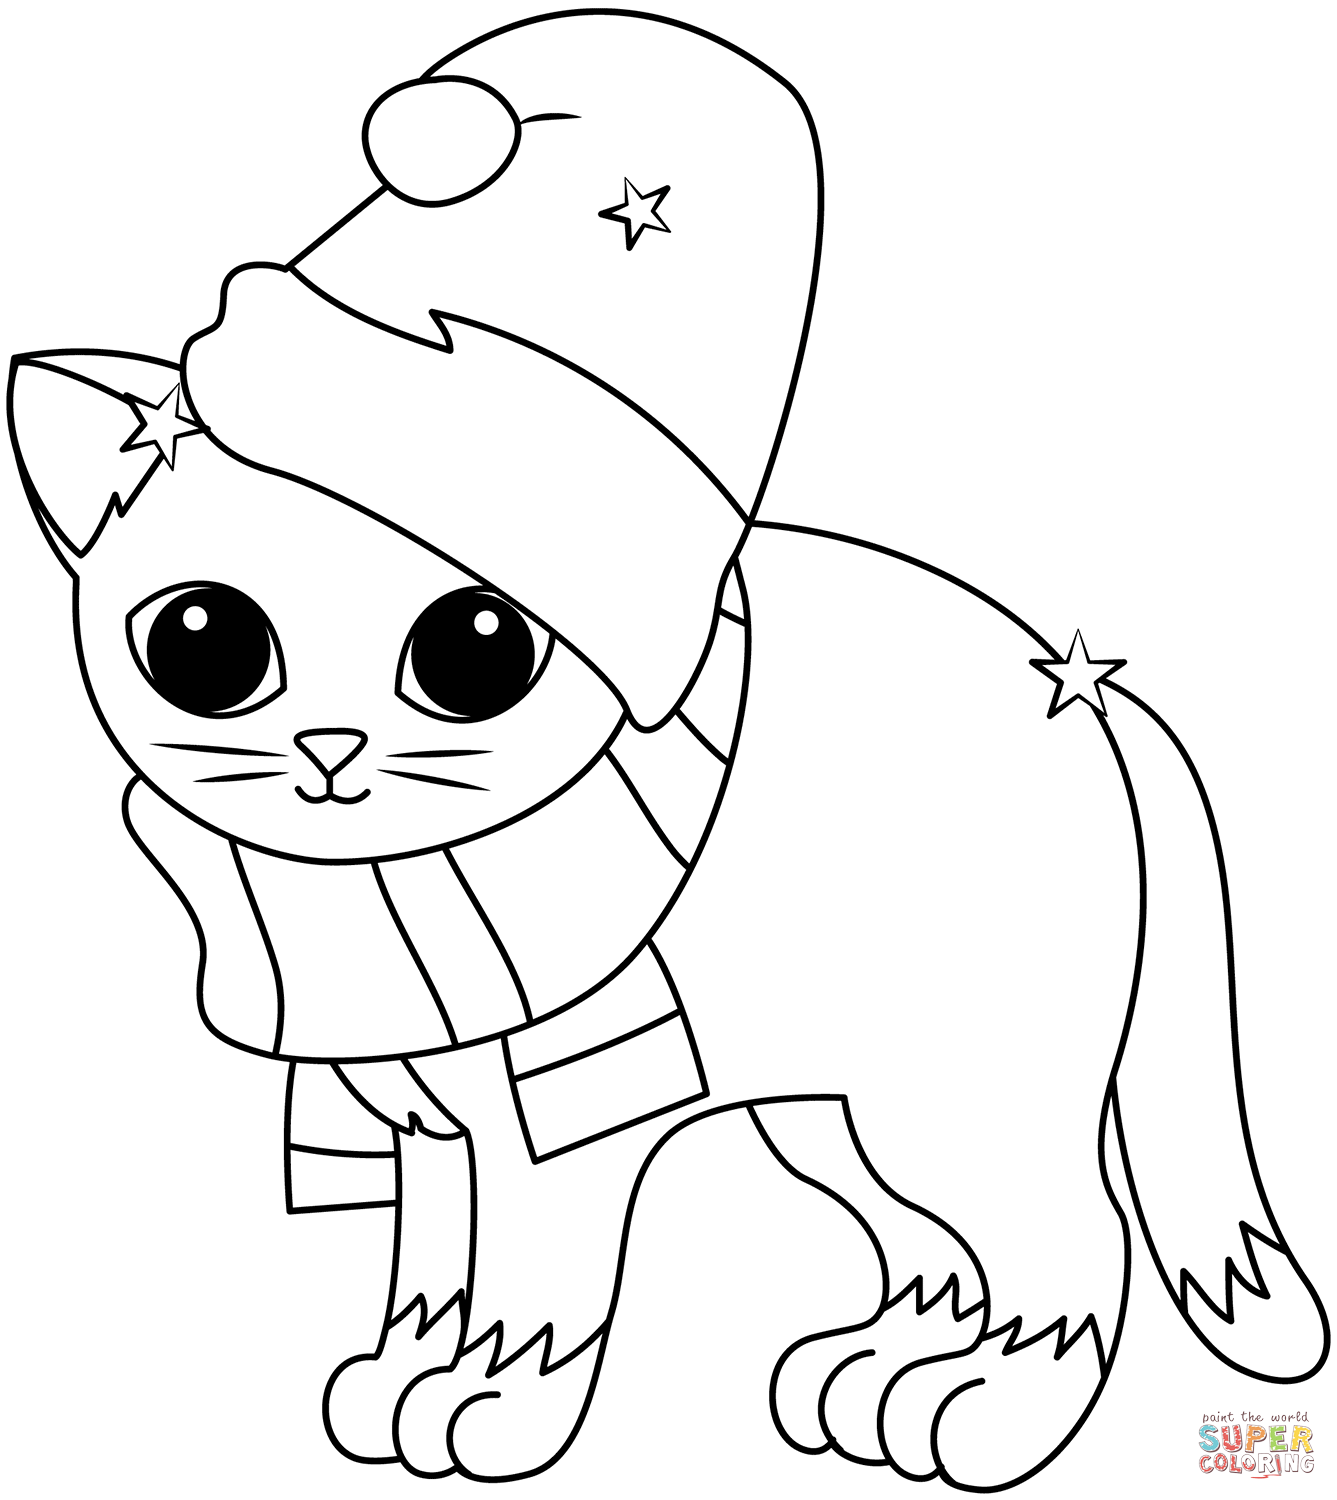 Christmas Kitten coloring page | Free Printable Coloring Pages